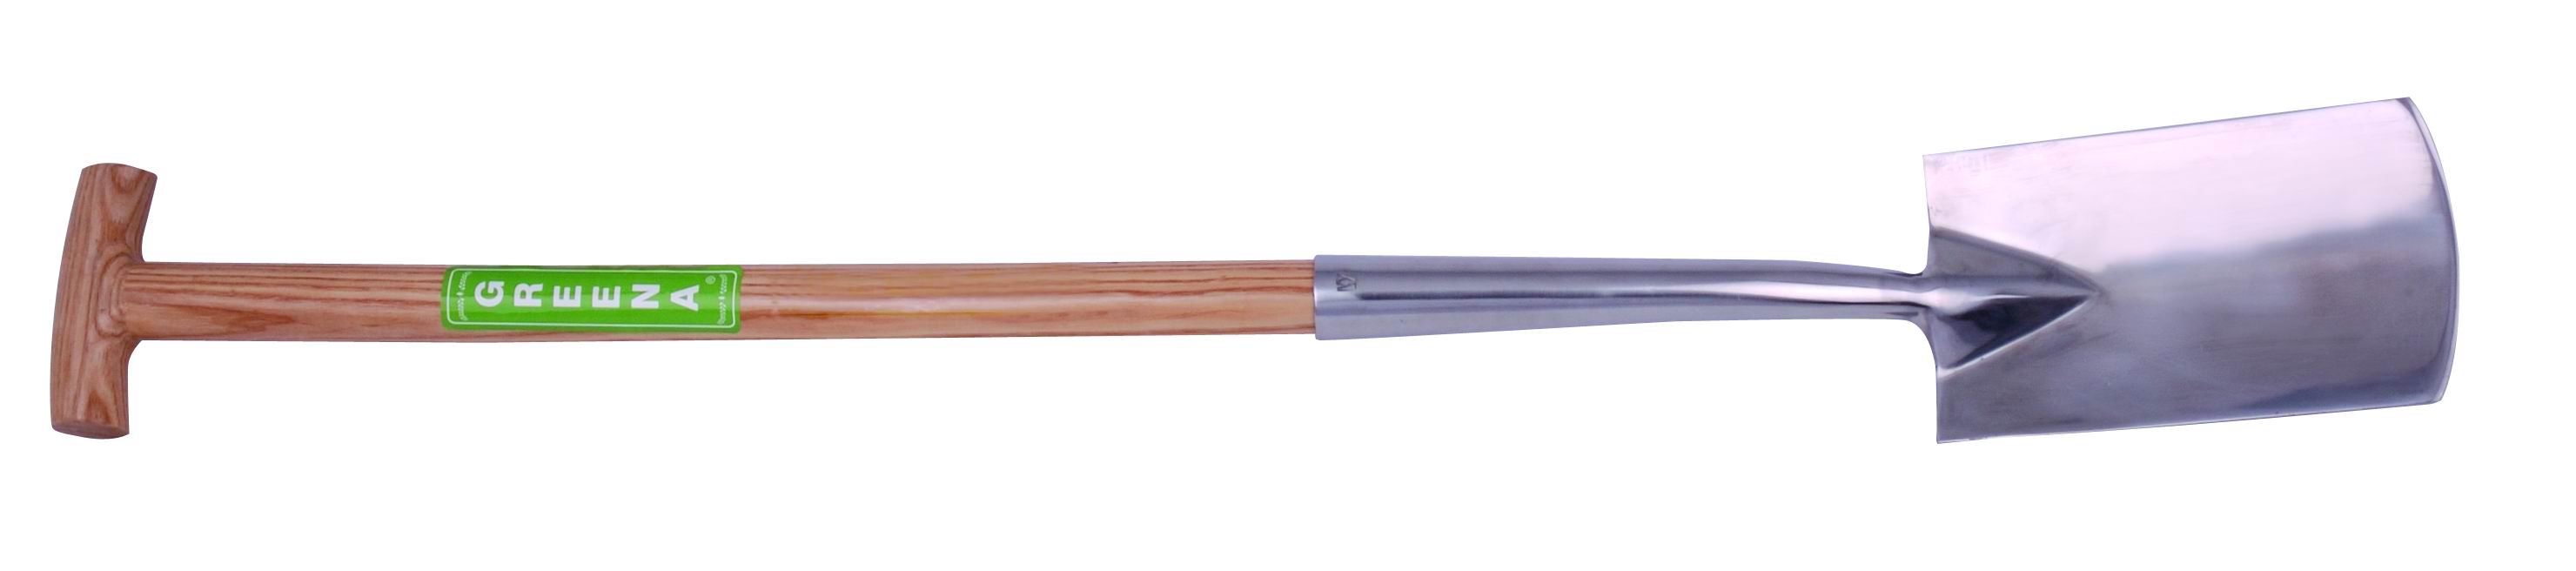  German Style Stainless Steel Digging Spade with Ash Wood Shaft and Cushione ( German Style Stainless Steel Digging Spade with Ash Wood Shaft and Cushione)